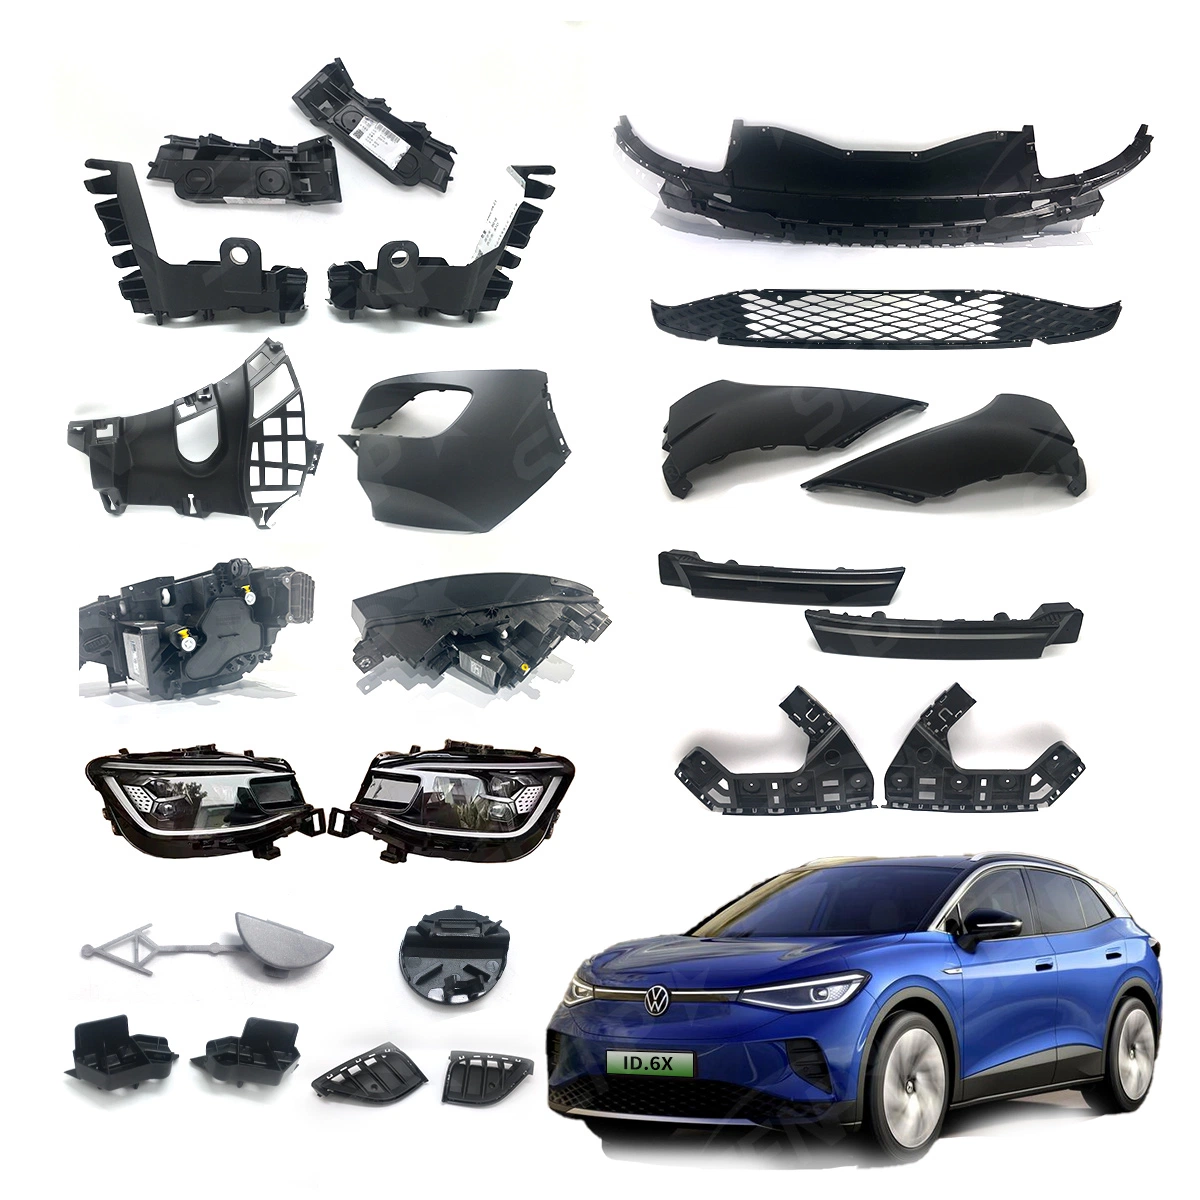 Senp Original Quality Body System Kit Auto Parts Suitable for Volkswagen Electric Vehicles: ID4, ID6, Electric Car Auto Parts